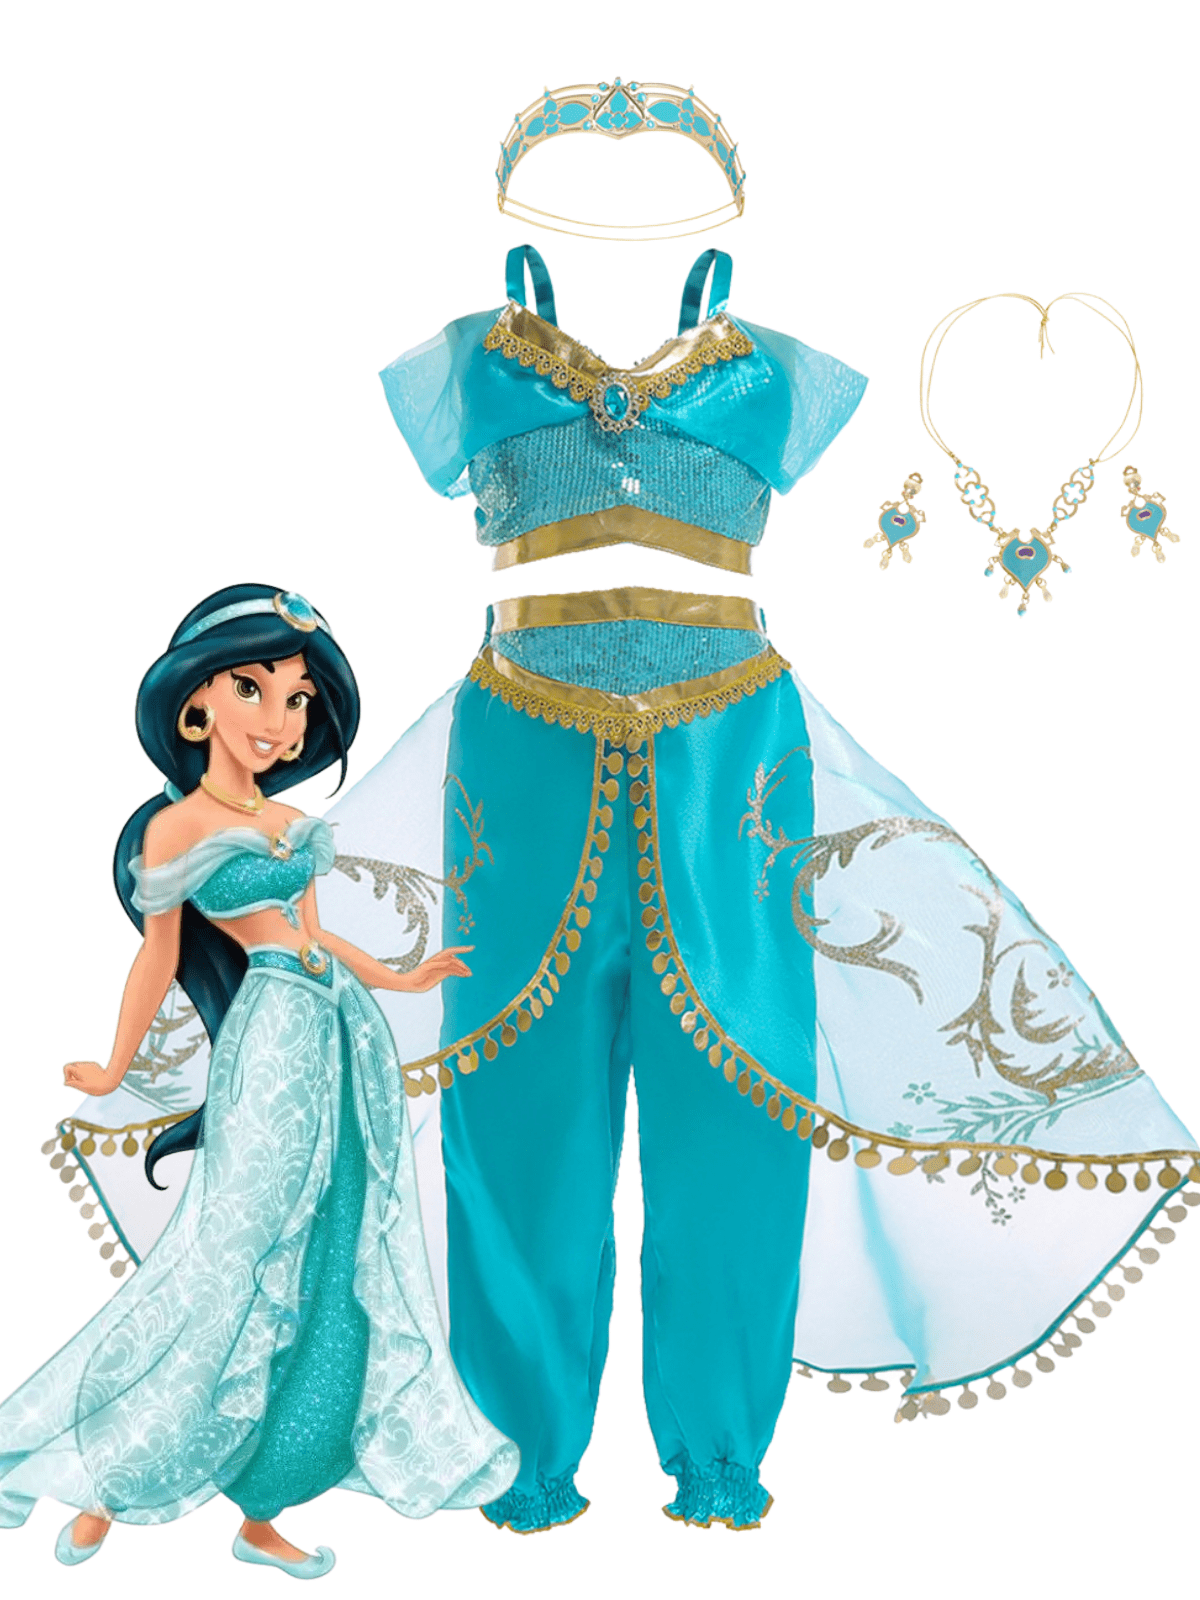 Jasmine Princess Jasmine Fancy Dress For Girls Perfect For Birthday  Parties, Christmas, And Cosplay Available In Sizes 3 10 Years Item #230731  From Xianstore07, $10.61 | DHgate.Com